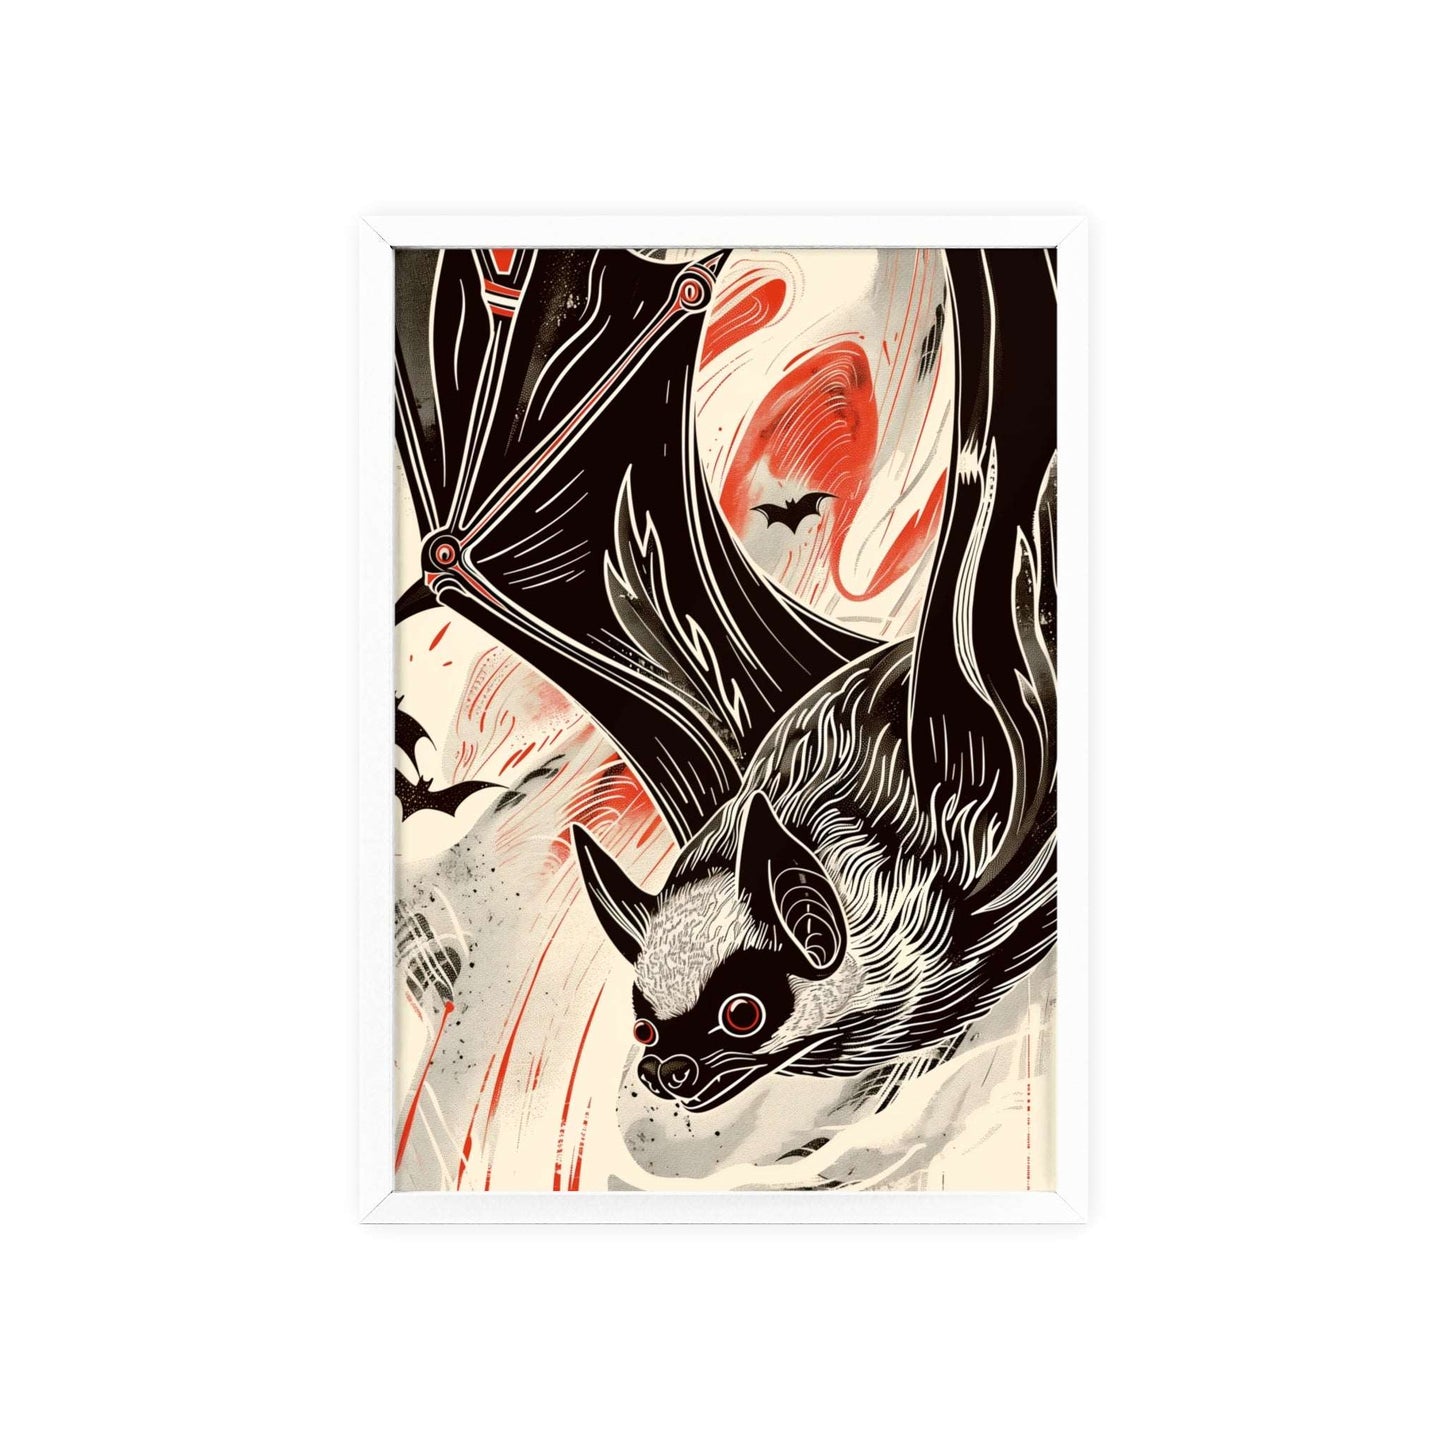 Perfect for modern home decor, this wall art piece features a majestic bat